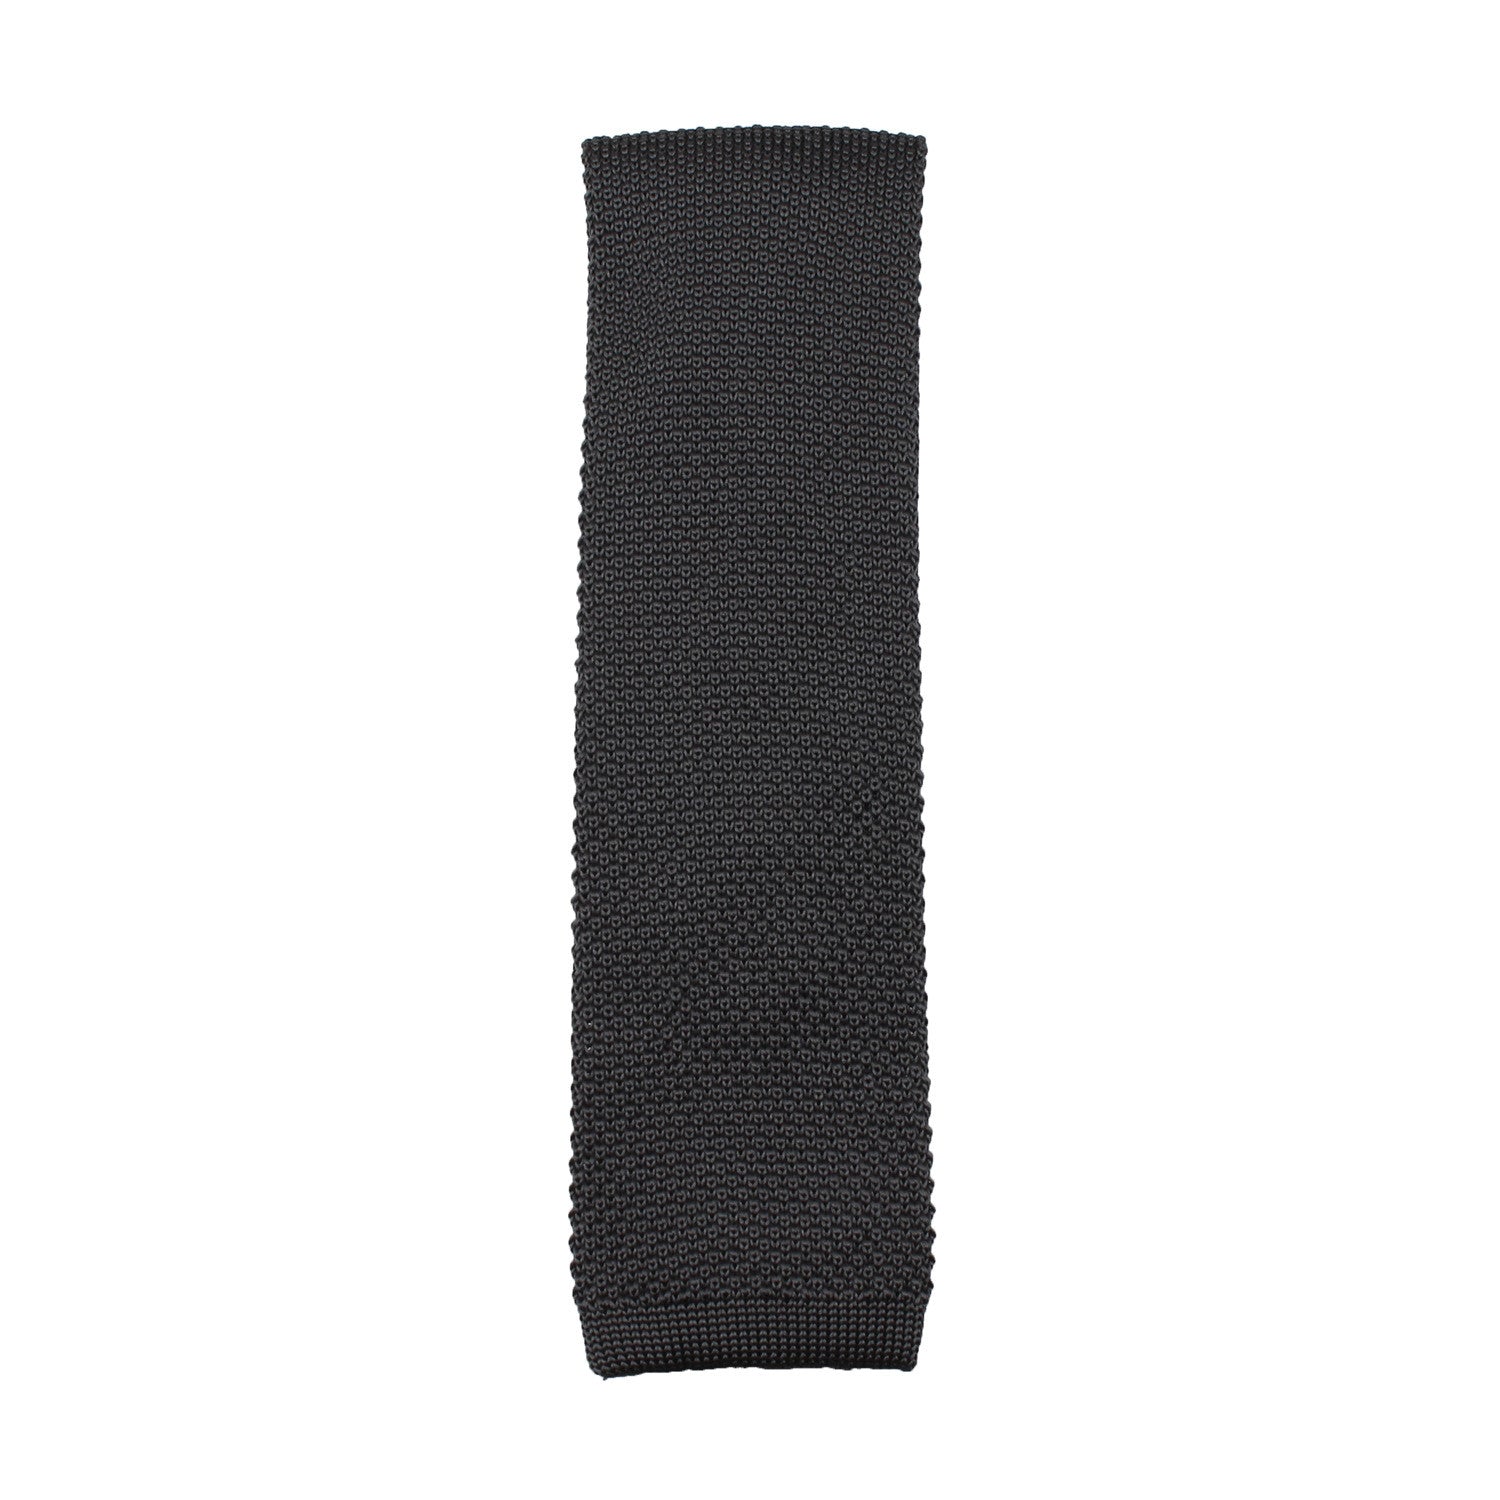 Charcoal Grey Knitted Tie | Knit Ties Knits Neckties Skinny Melbourne ...